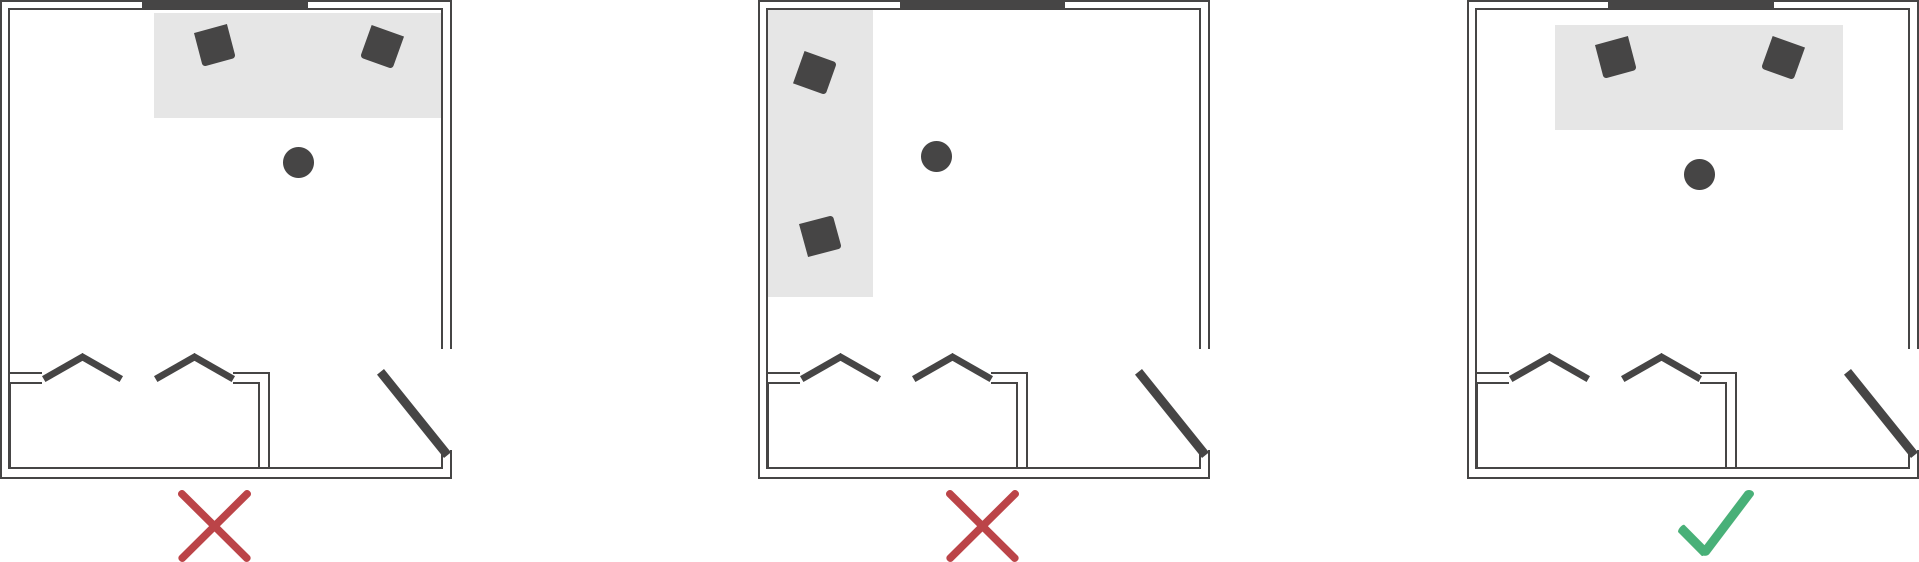 Room plan with 3 desk positions